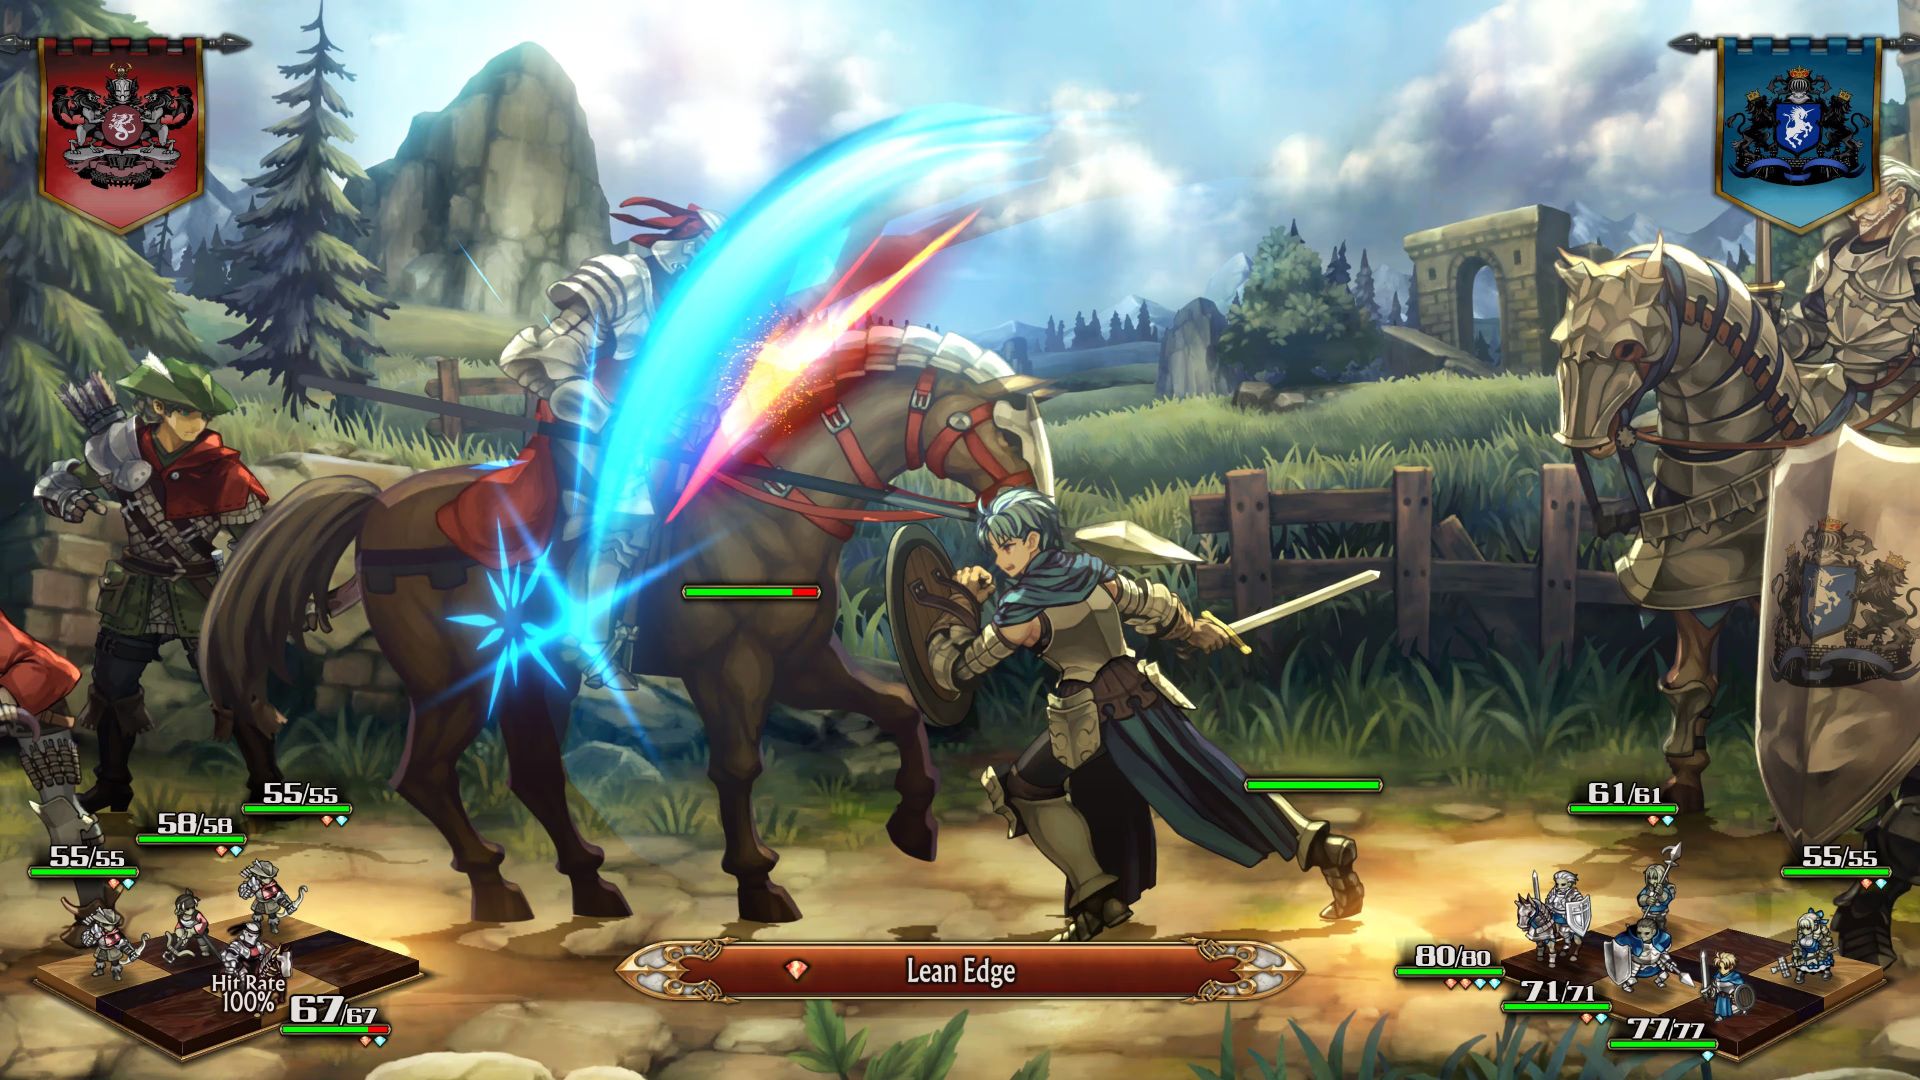 Alain fighting a knight in Unicorn Overlord